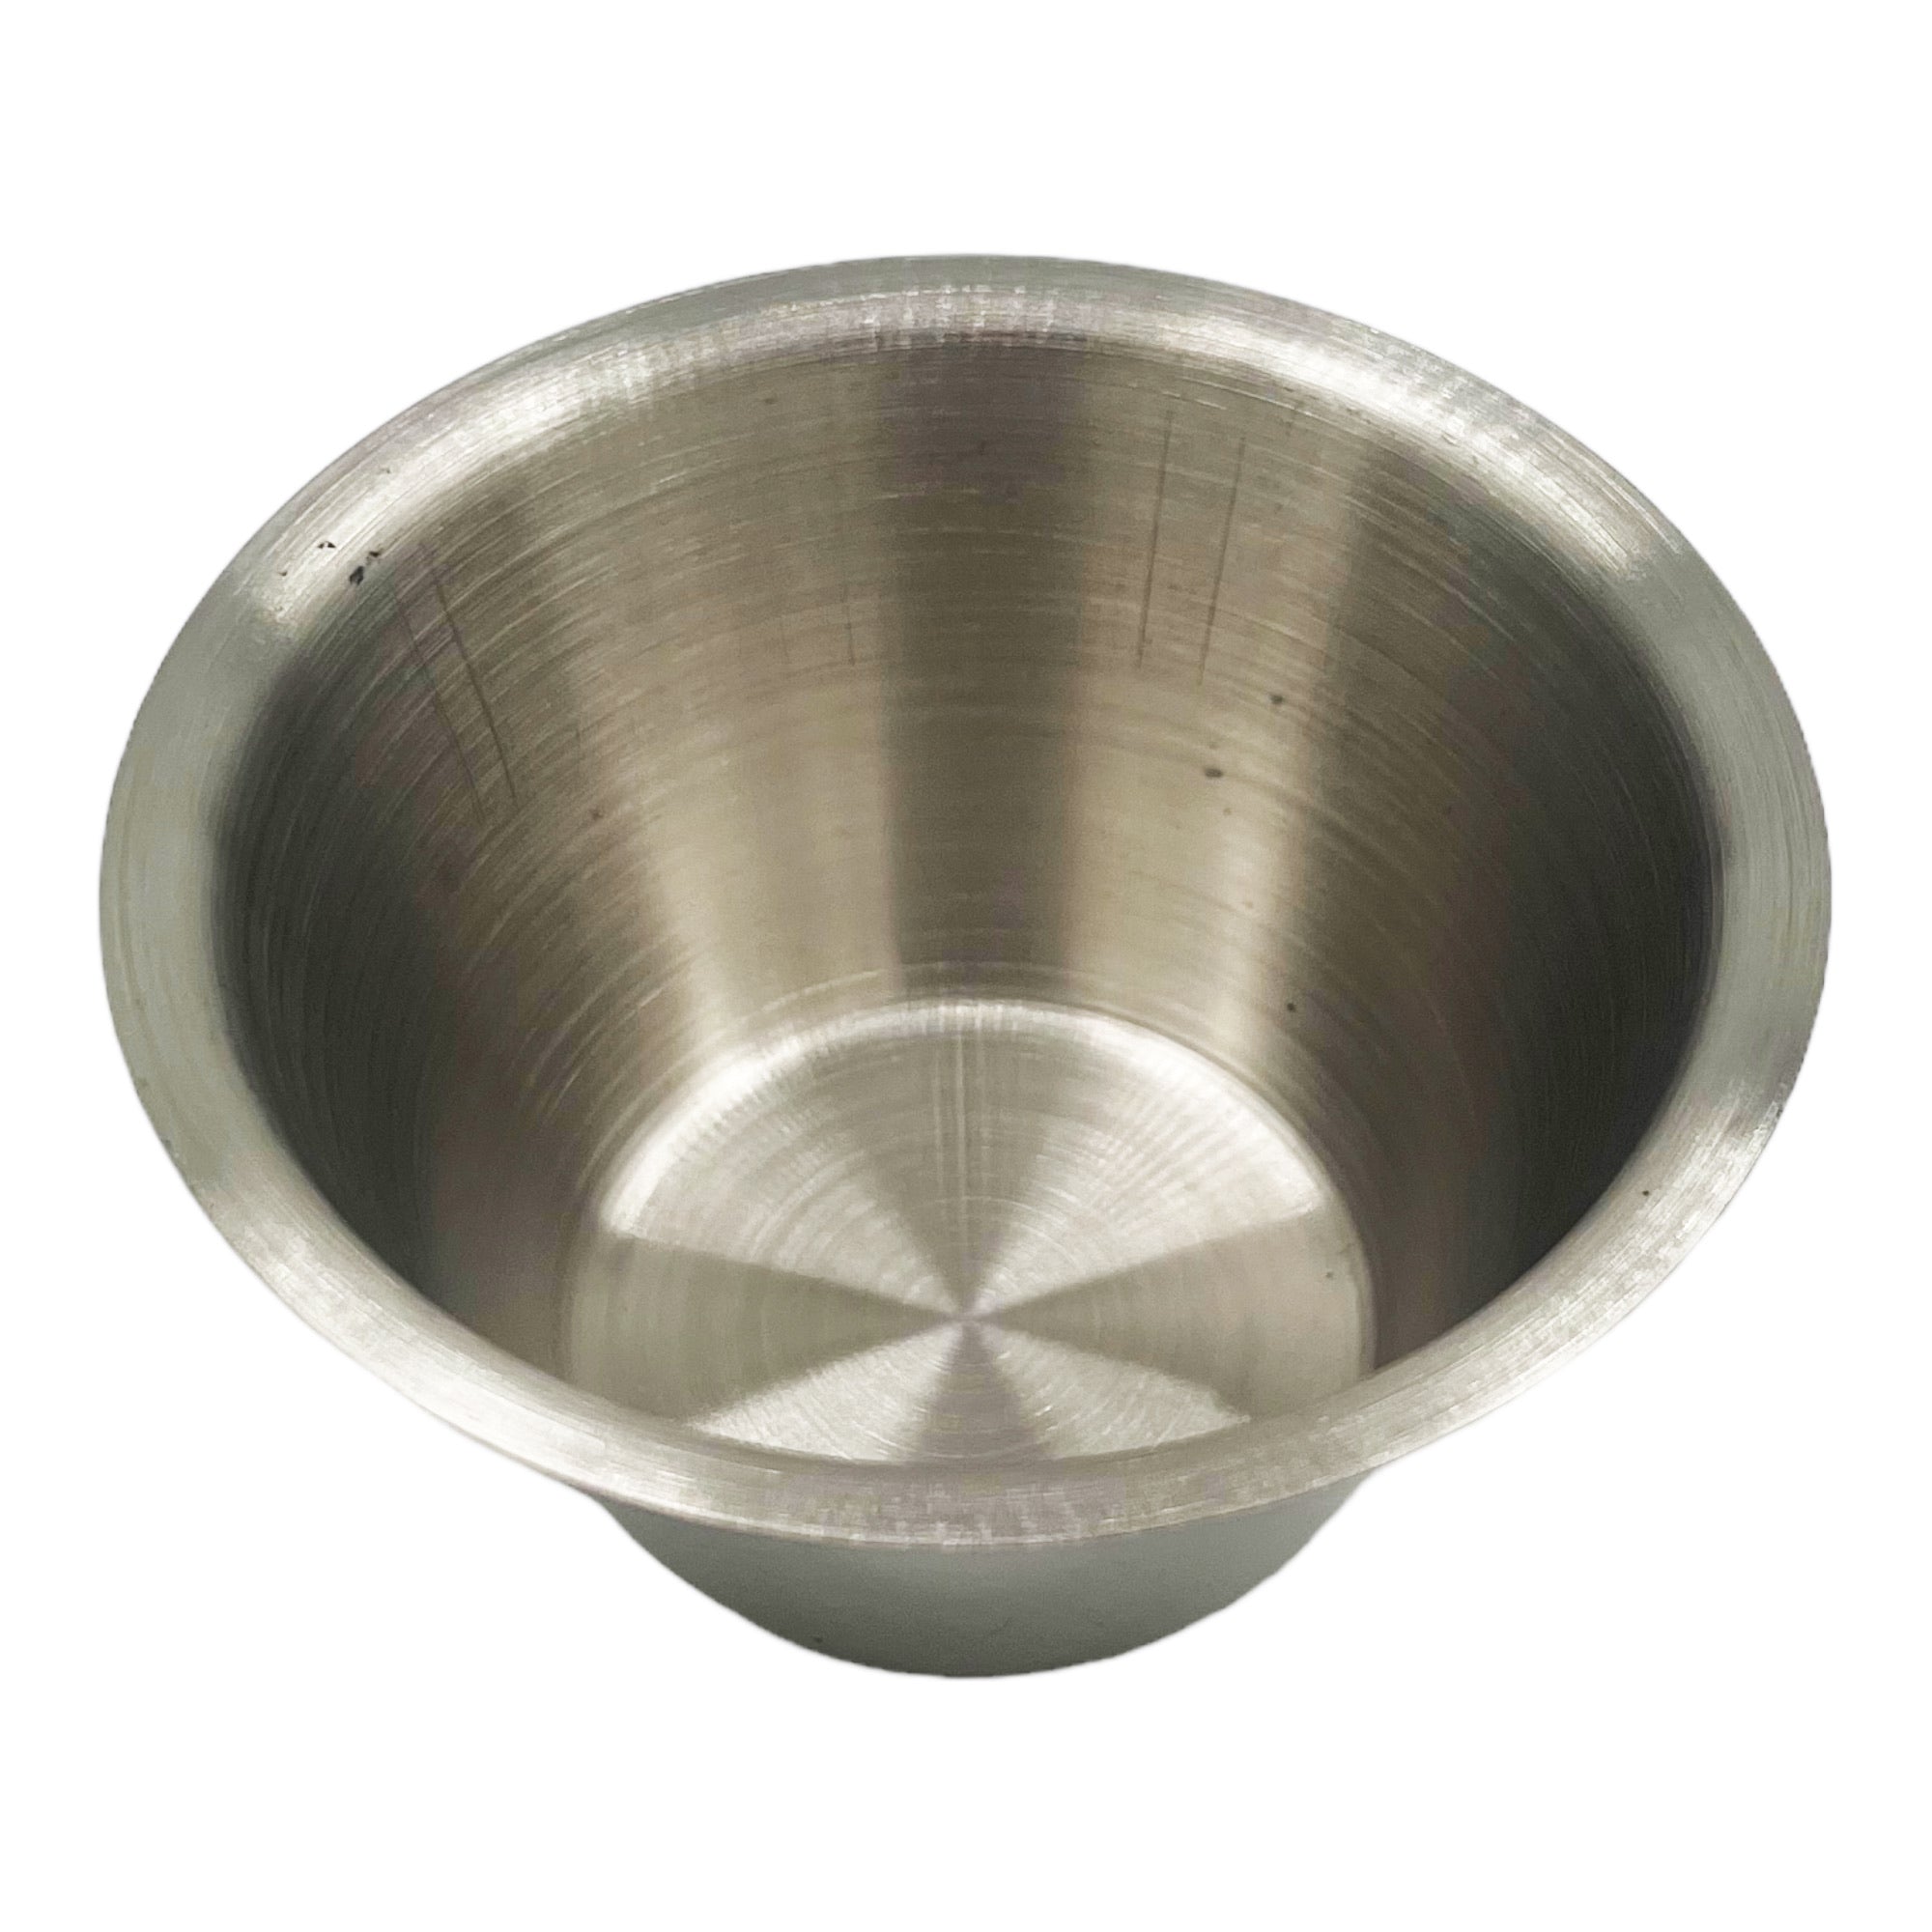 Eson - Stainless Steel Shaving Bowl Cup Silver 5.5x10cm